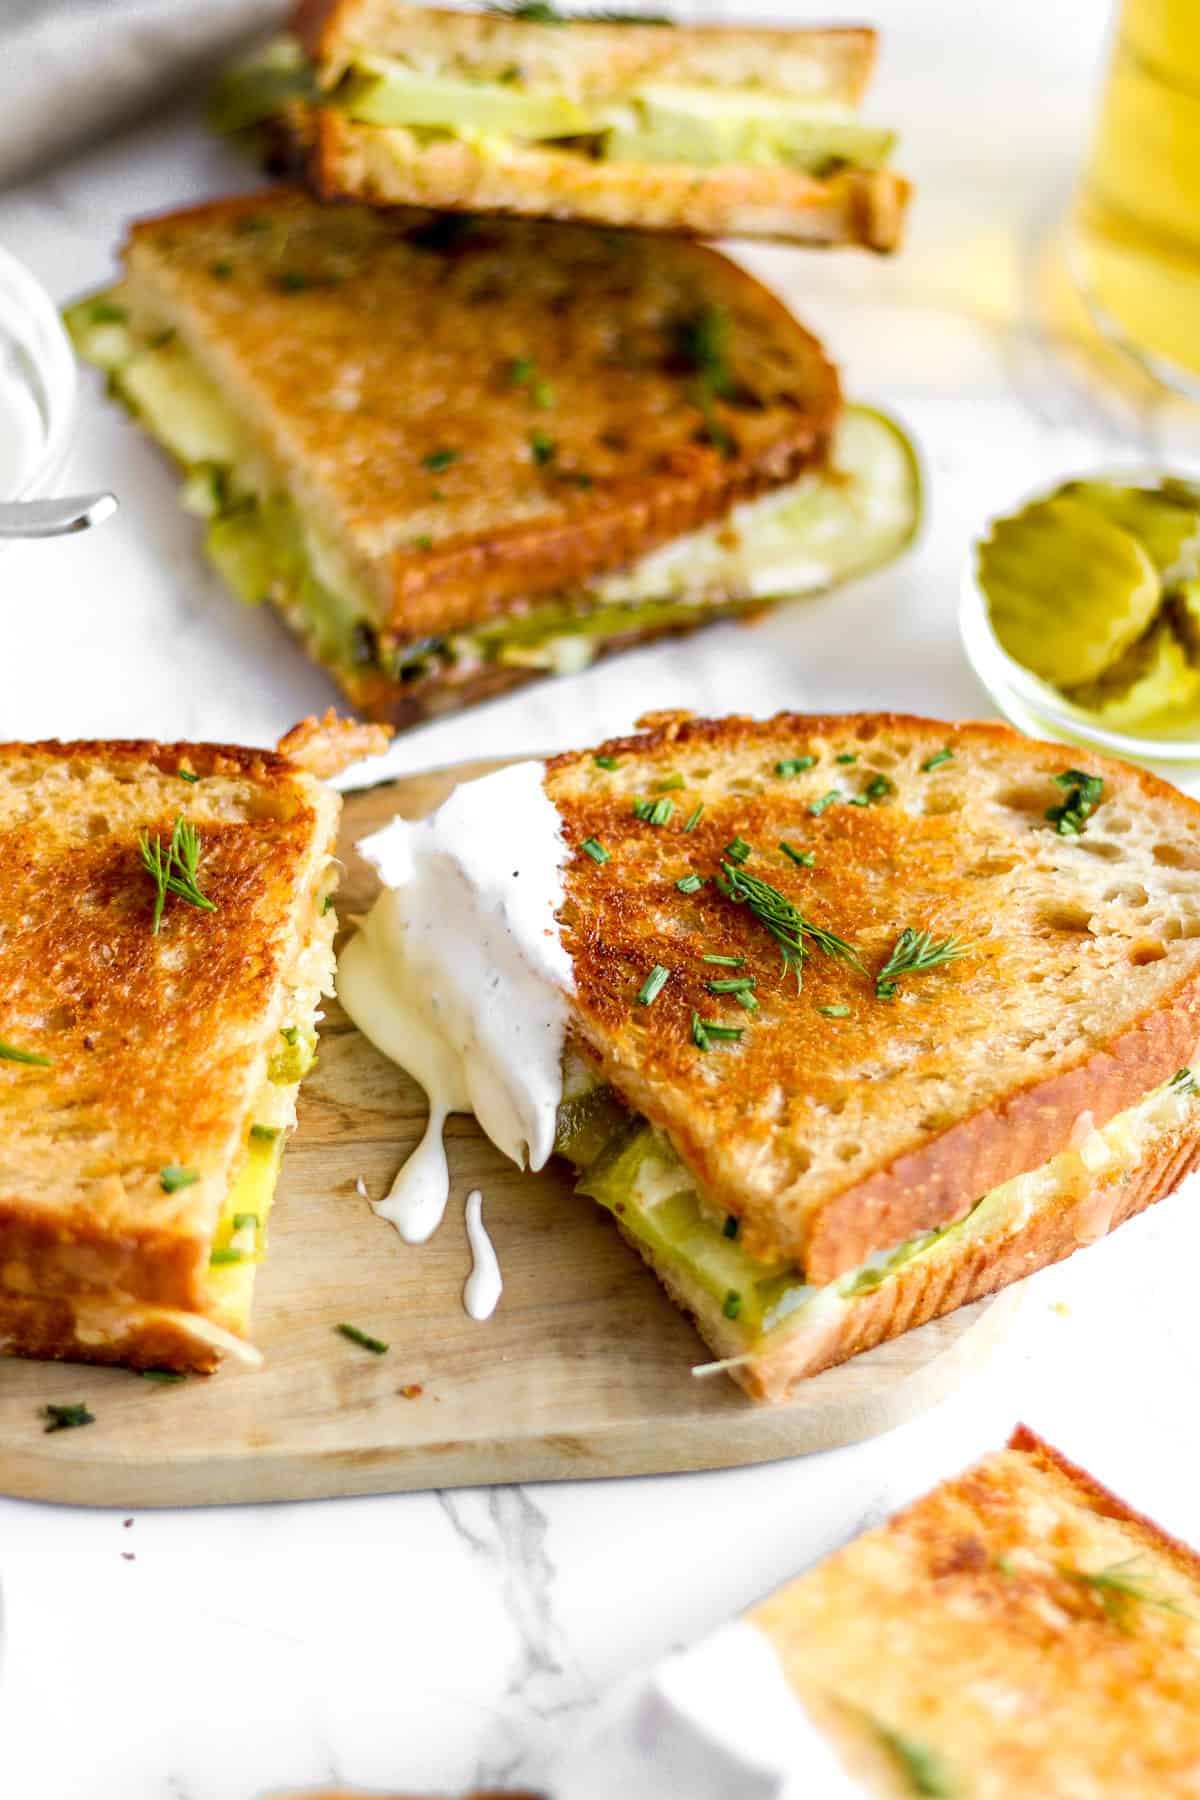 Sandwich with herbs dipped in ranch.